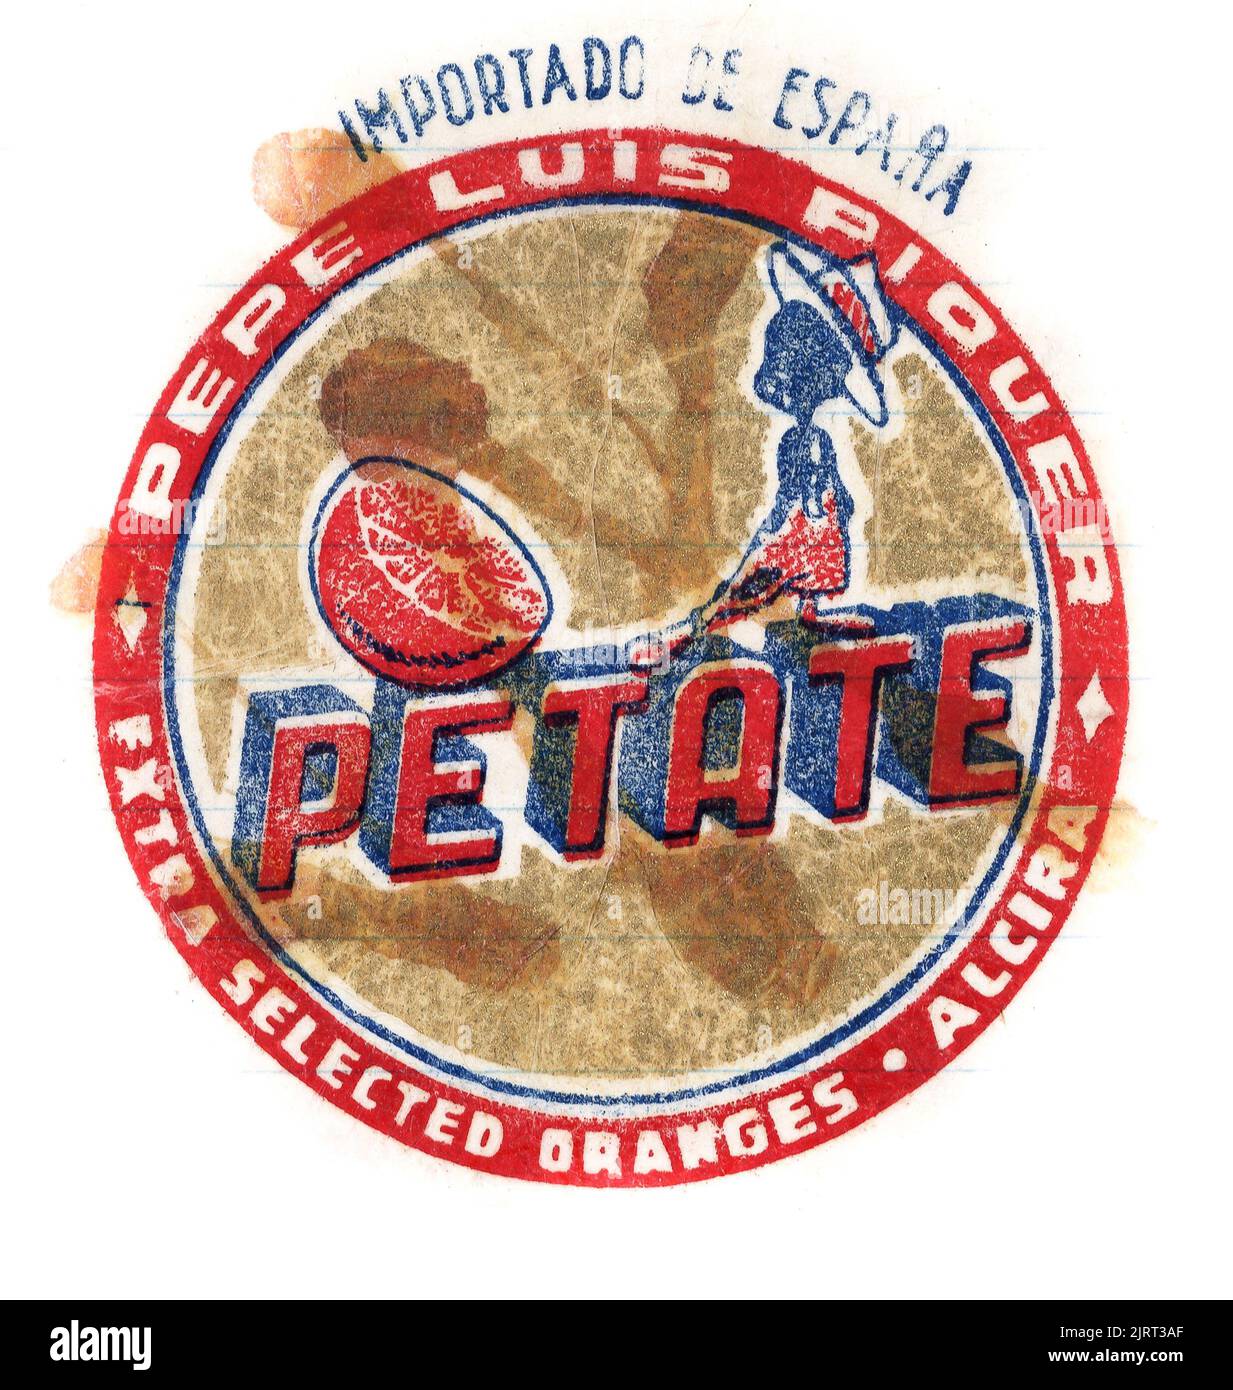 Fresh fruit tissue paper wrapper, from mid-1950s England, with grower's trade mark. Petate, Pepe Luis Piquer, Importado de Espana. Selected oranges. Stock Photo